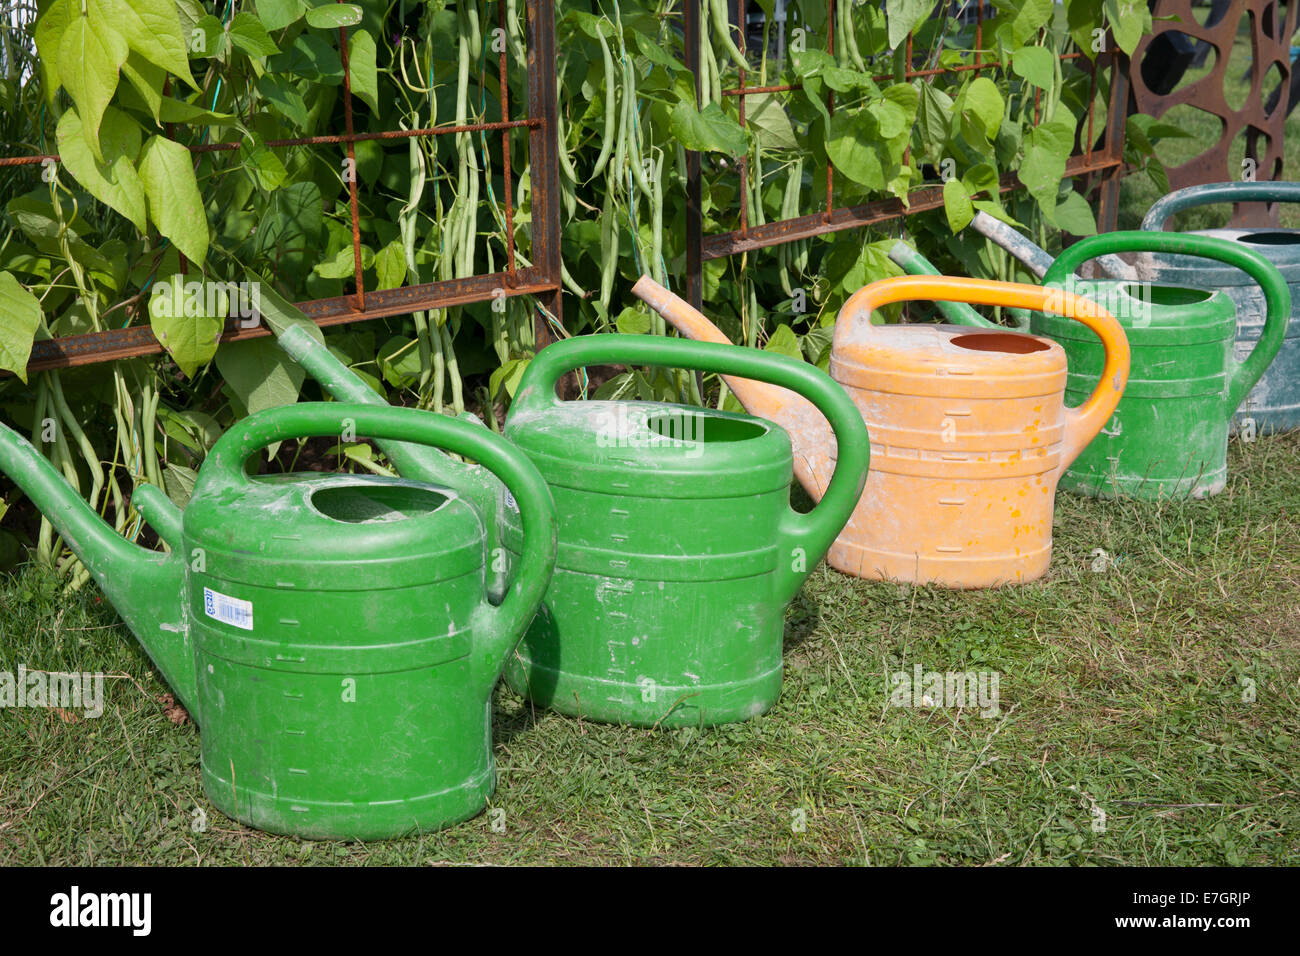 Row of watering cans next to french beans at Tatton Park 2014 Cheshire RHS flower show - drought Stock Photo